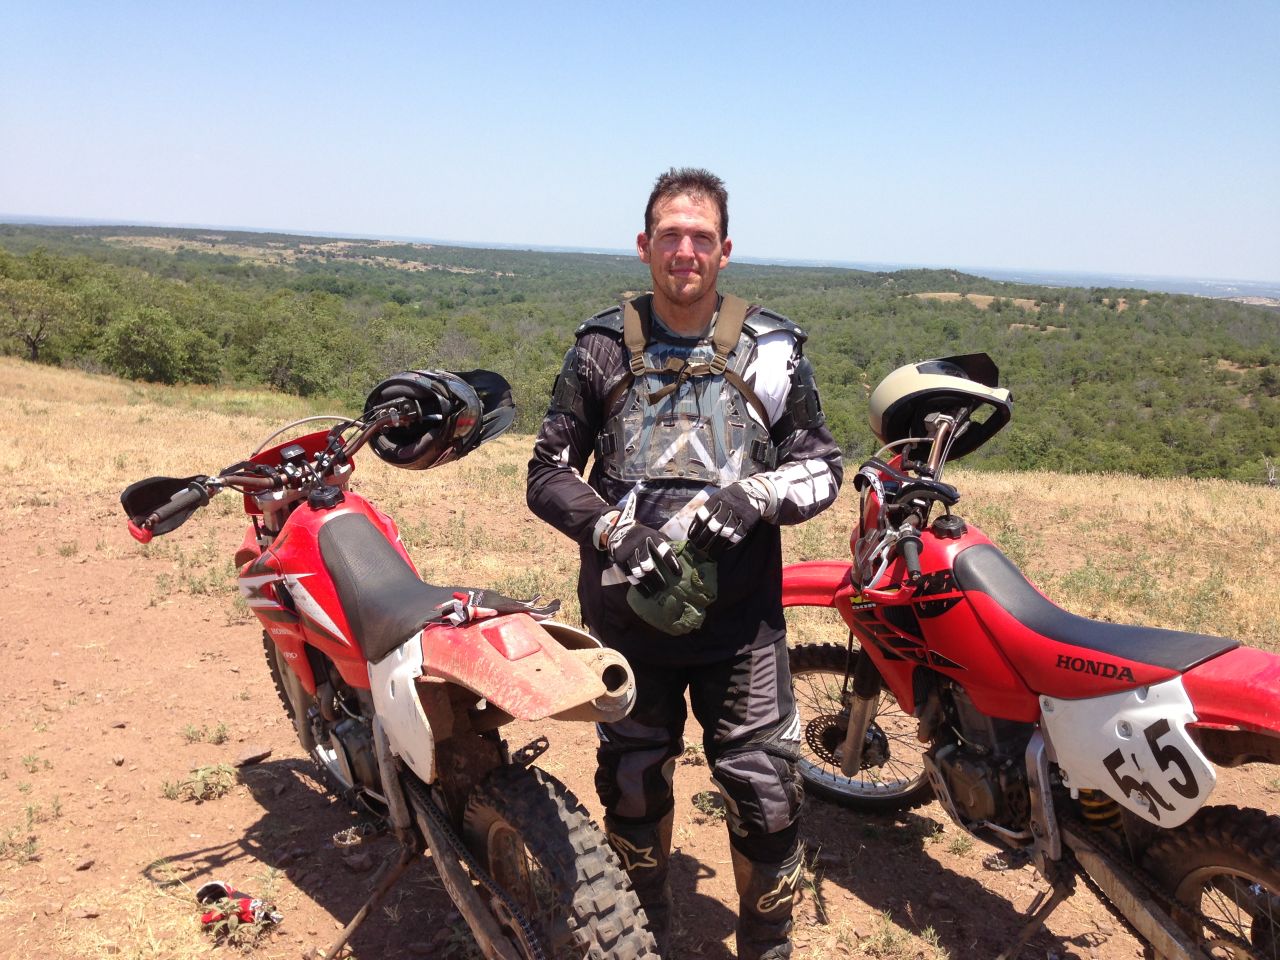 McDonald will fulfill a lifelong dream this November by racing a motorcycle in the Baja 1000.